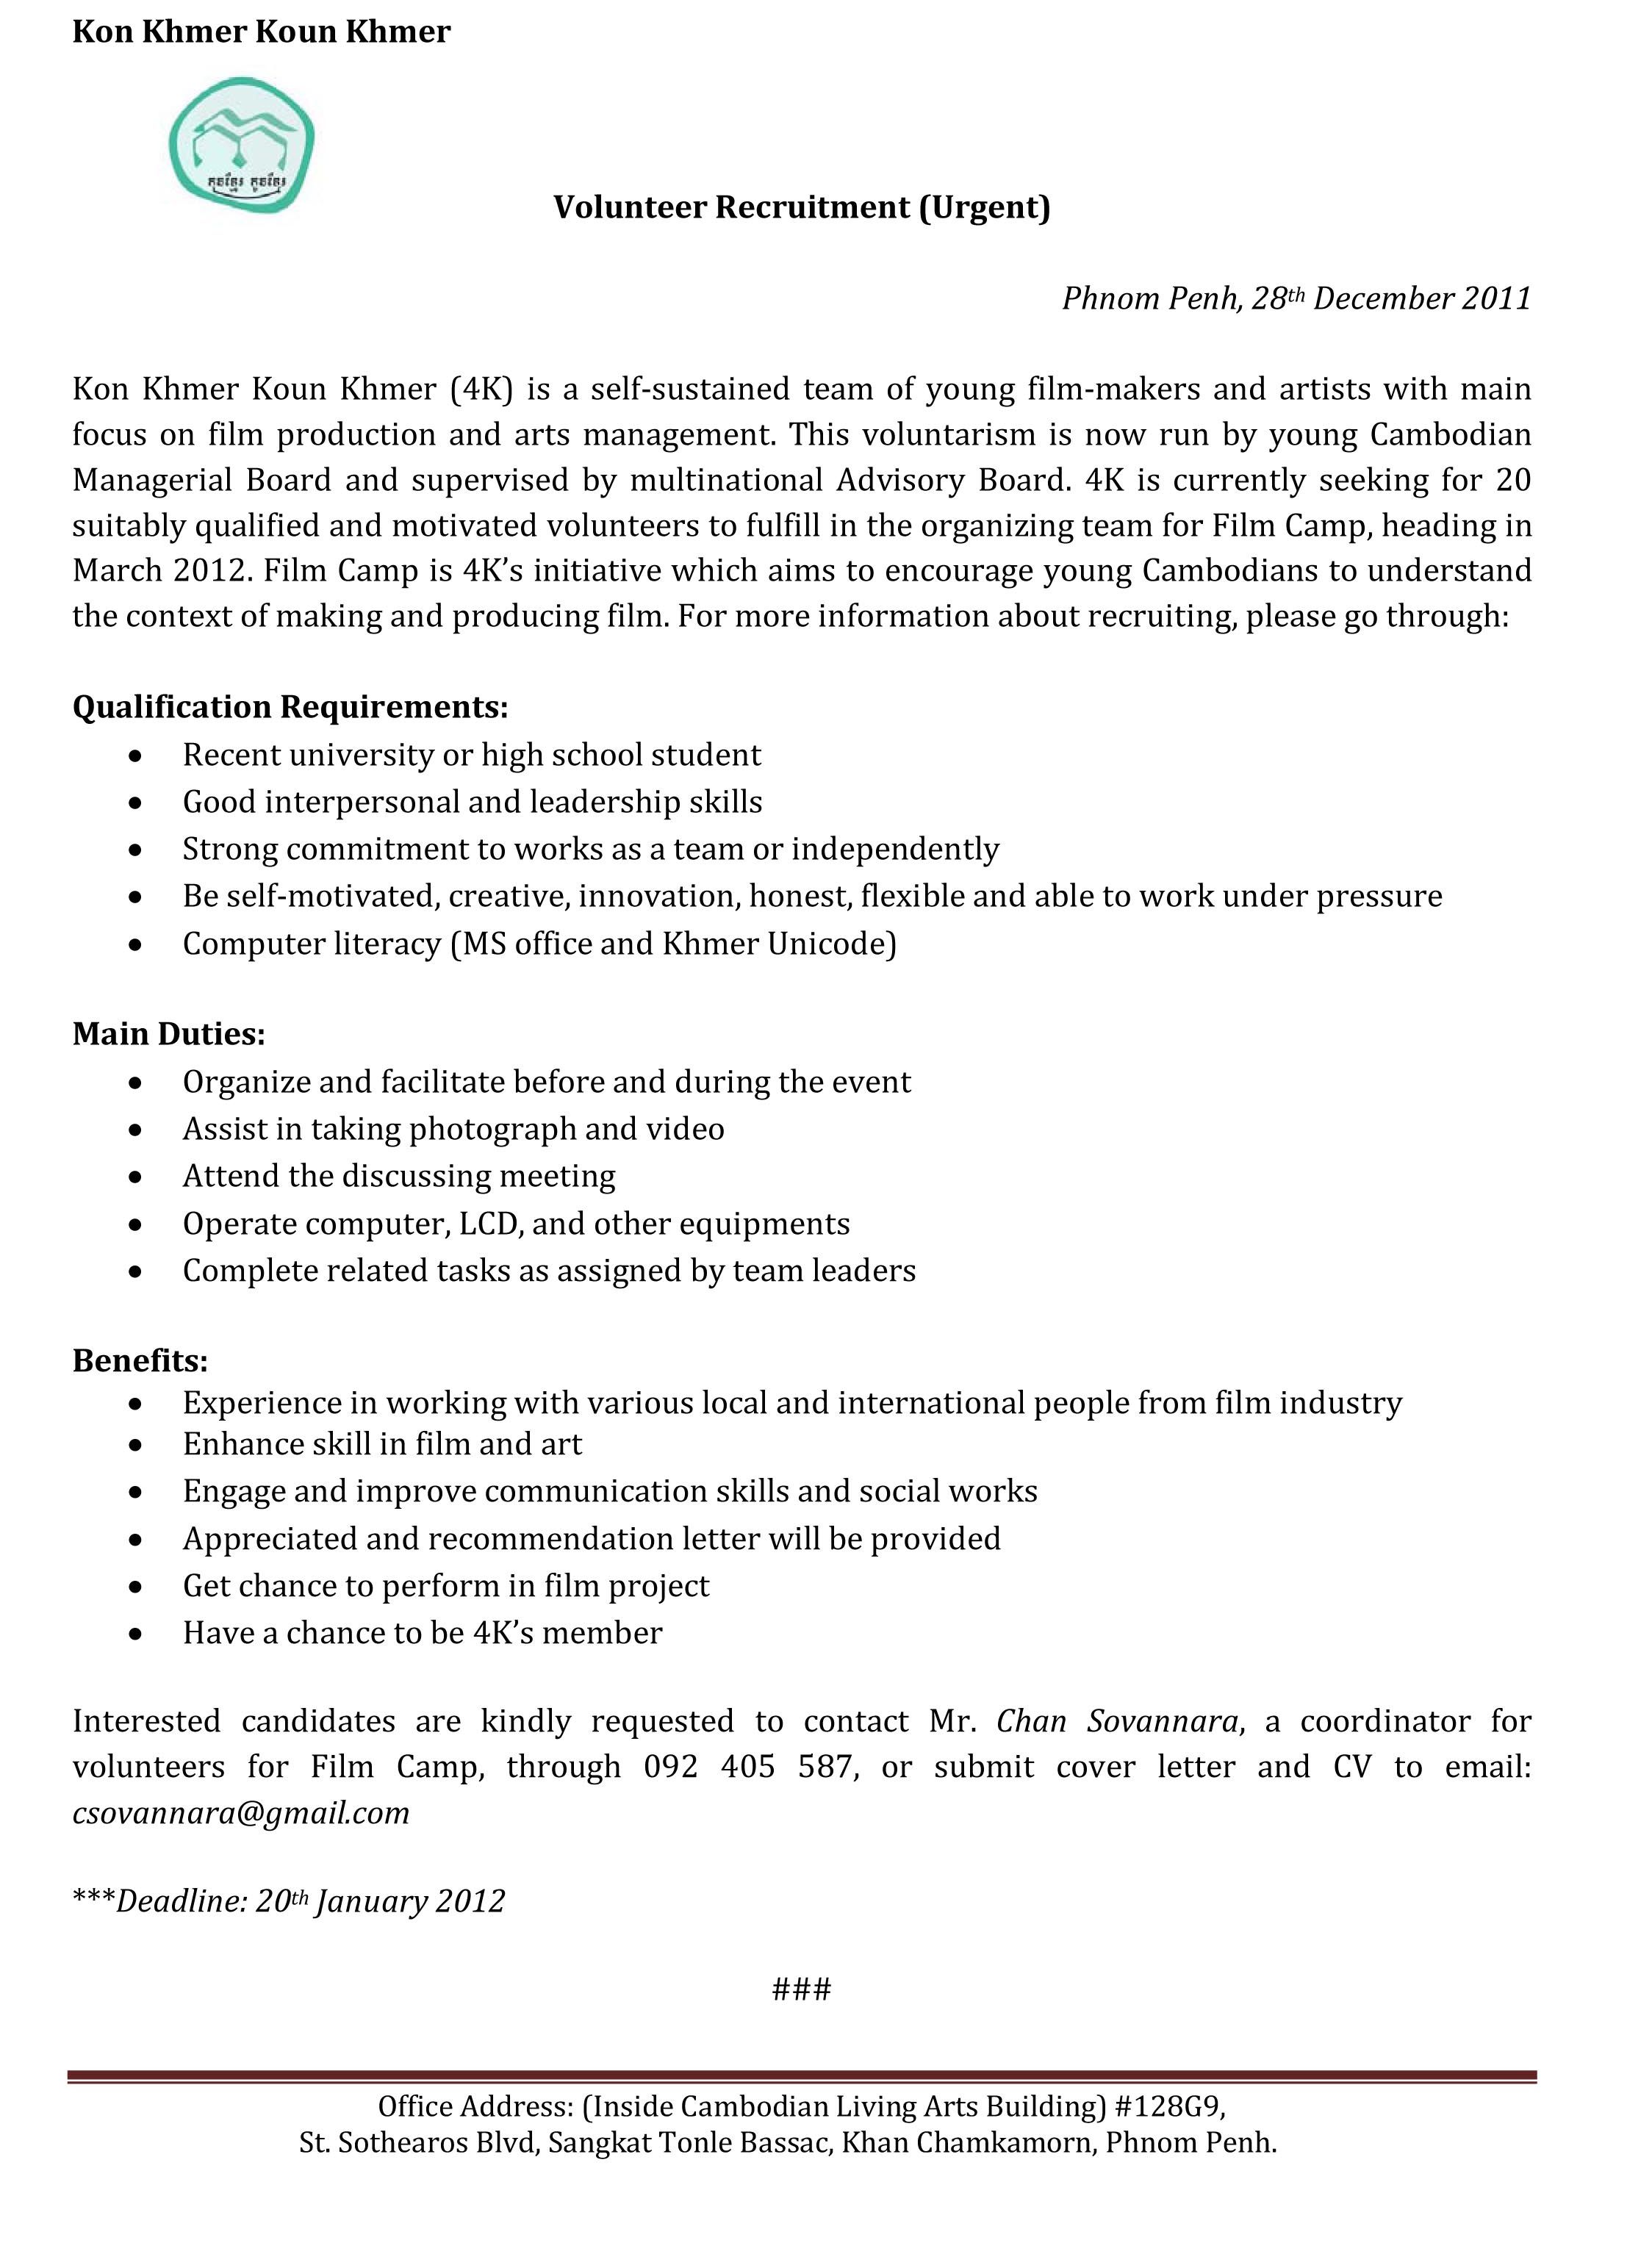 Cover Letter Template Volunteer Position  